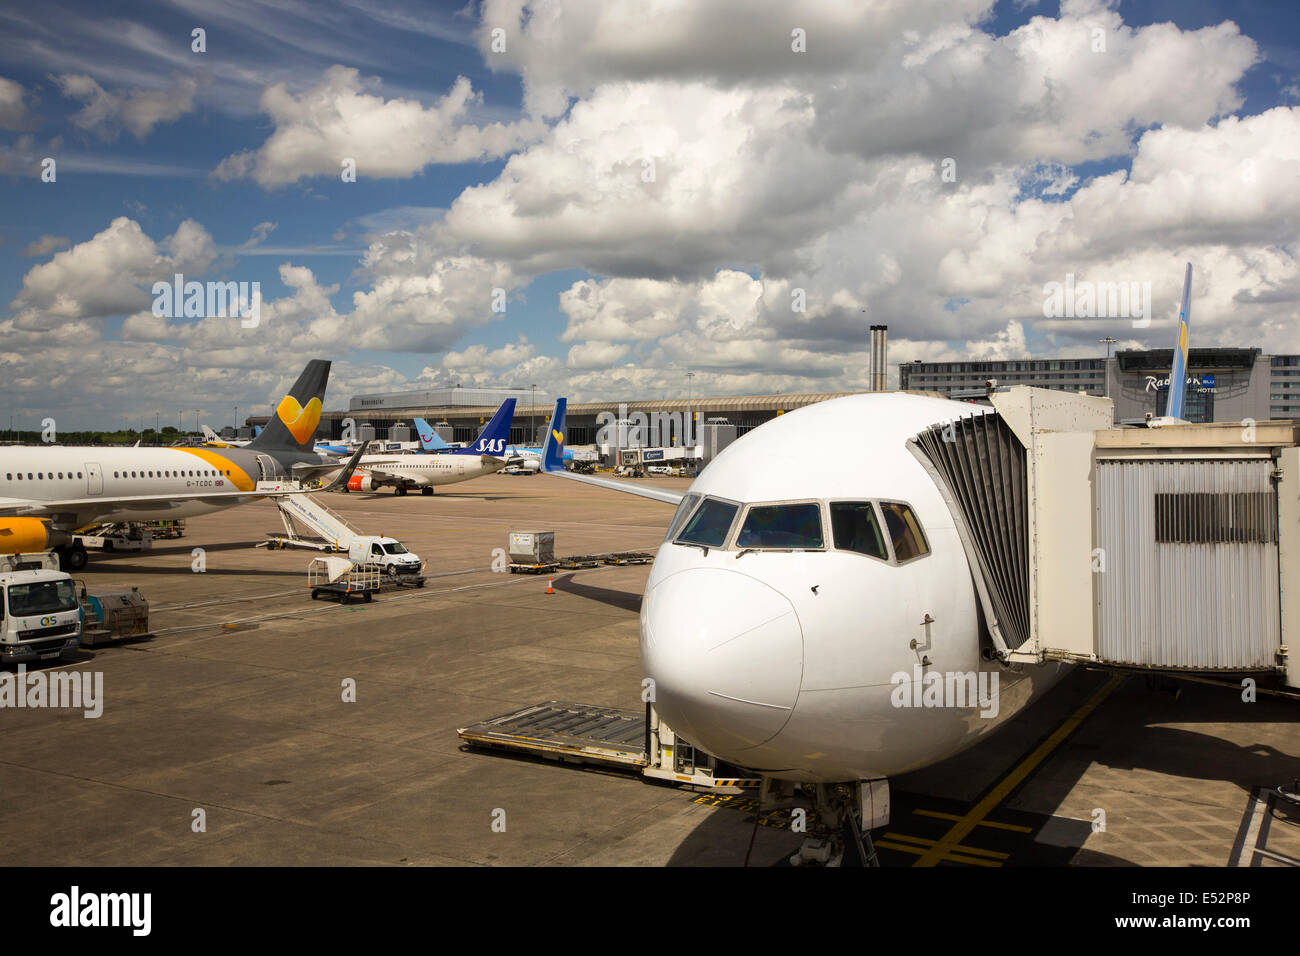 A plane at Manchester airport, UK. Stock Photo